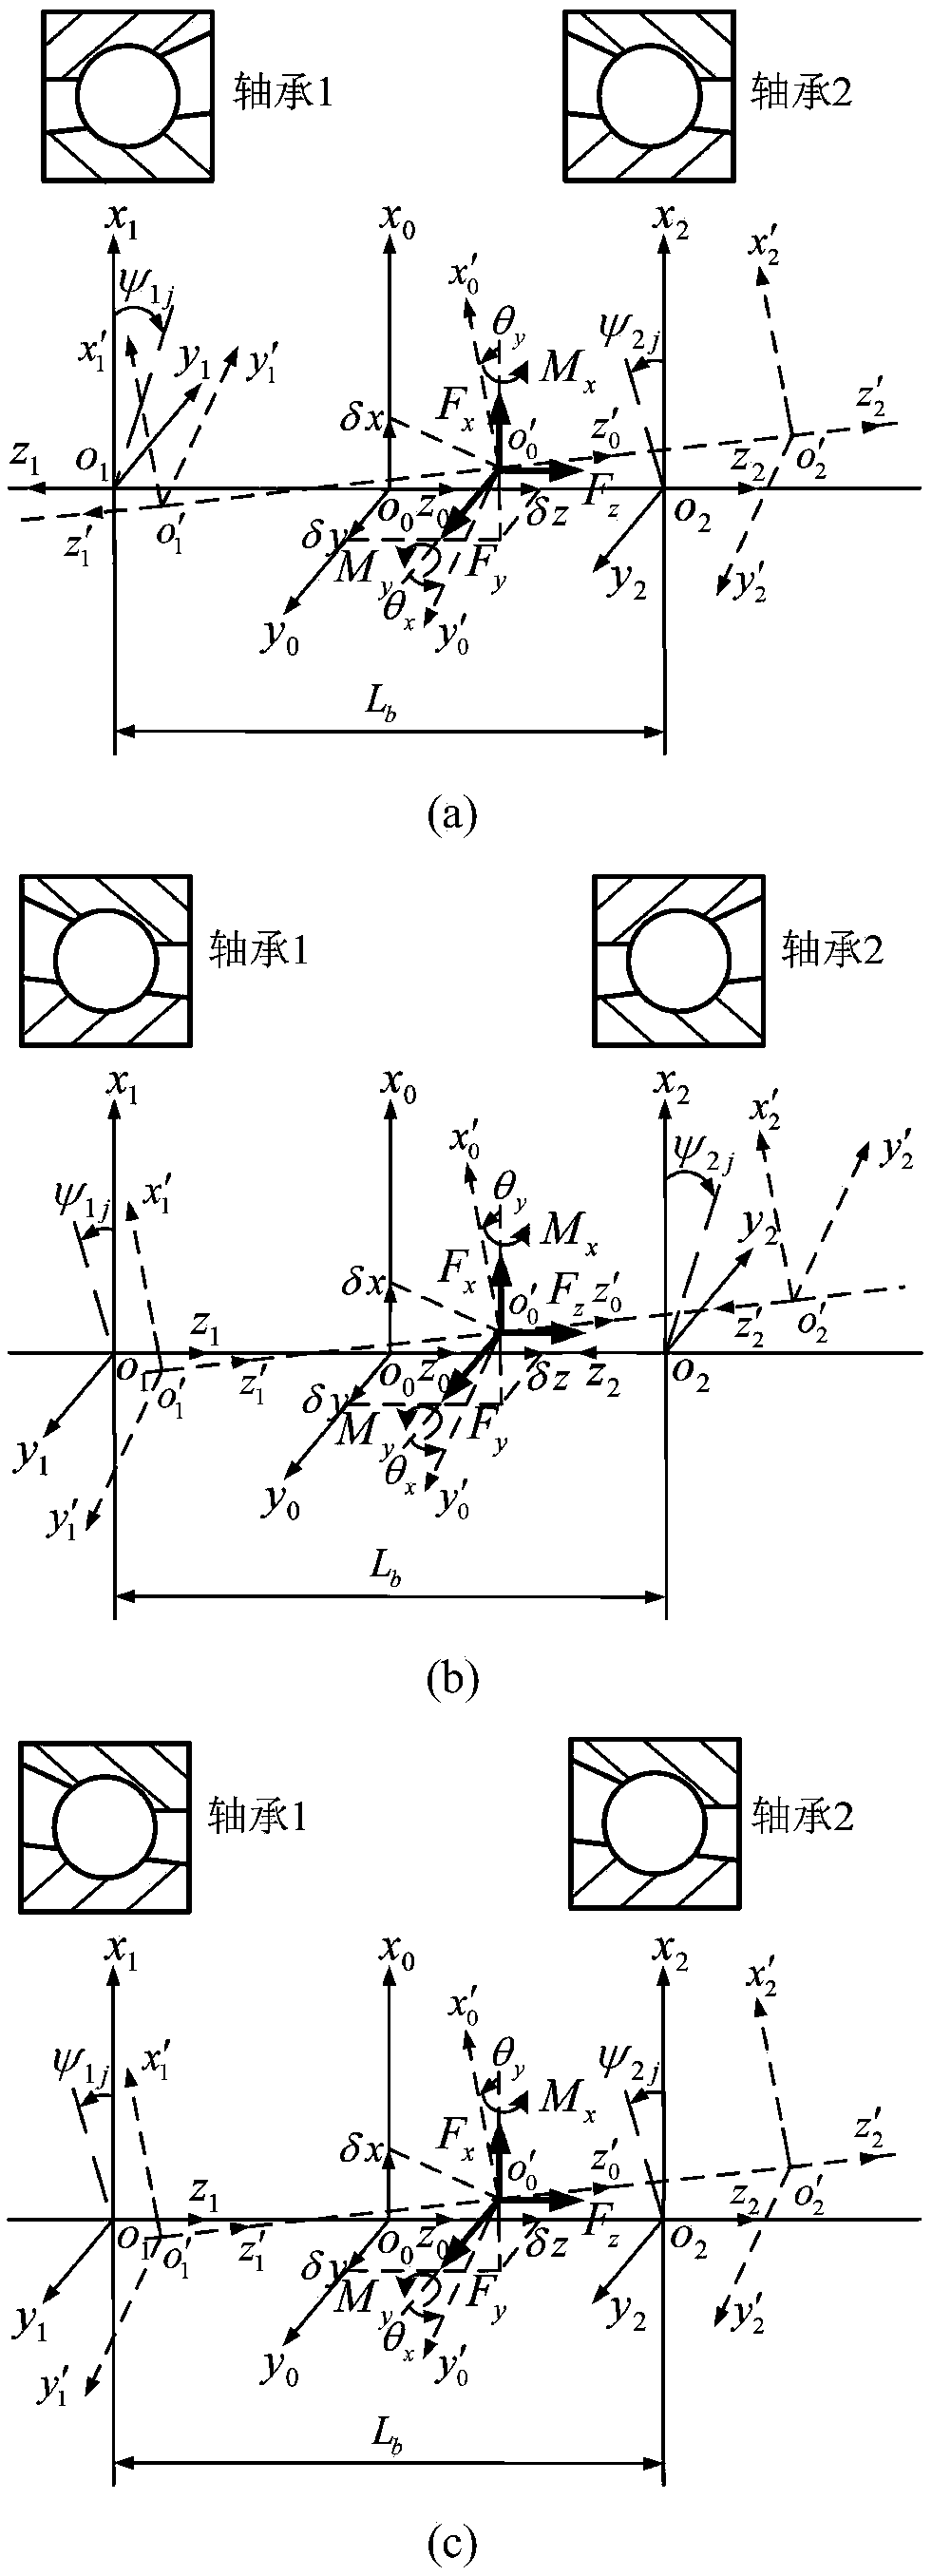 Dynamic design method of high-speed double-rolling bearing electric spindle rotor system